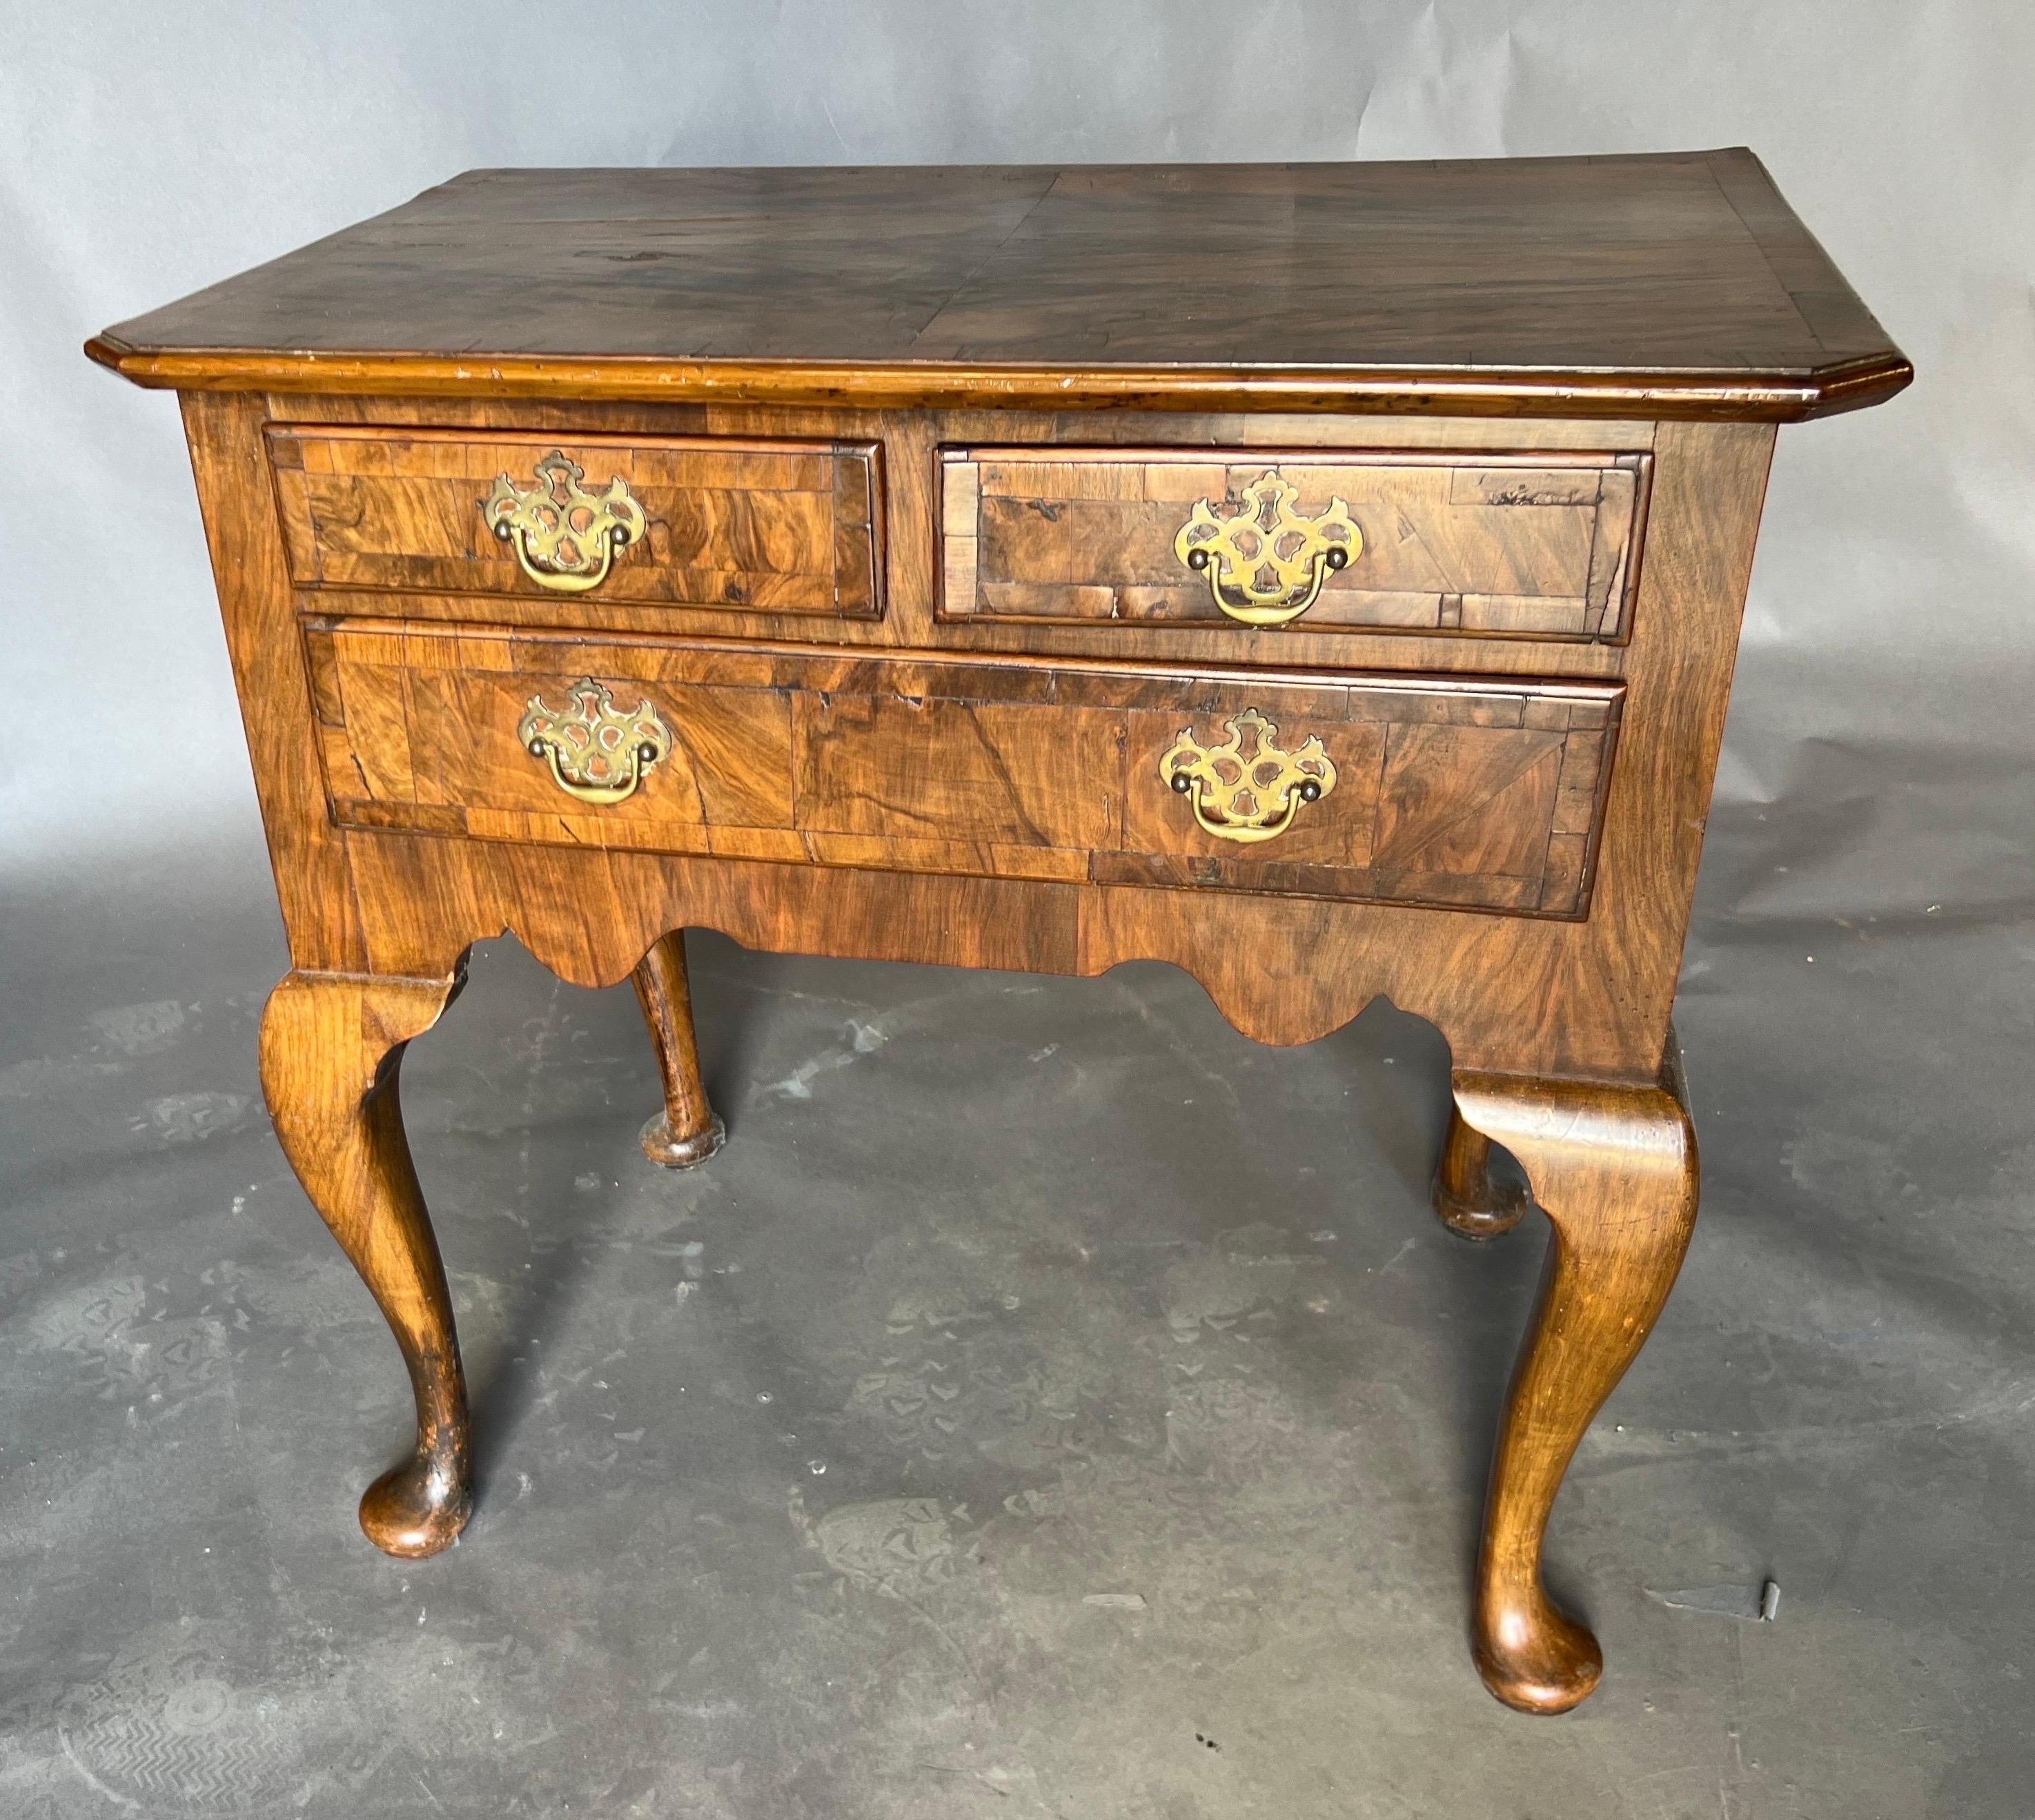 Great little 18th century English burl walnut and oak lowboy on cabriole legs and pad feet. This beauty features an overhanging top, two smaller drawers over one larger drawer and great color and patina. 